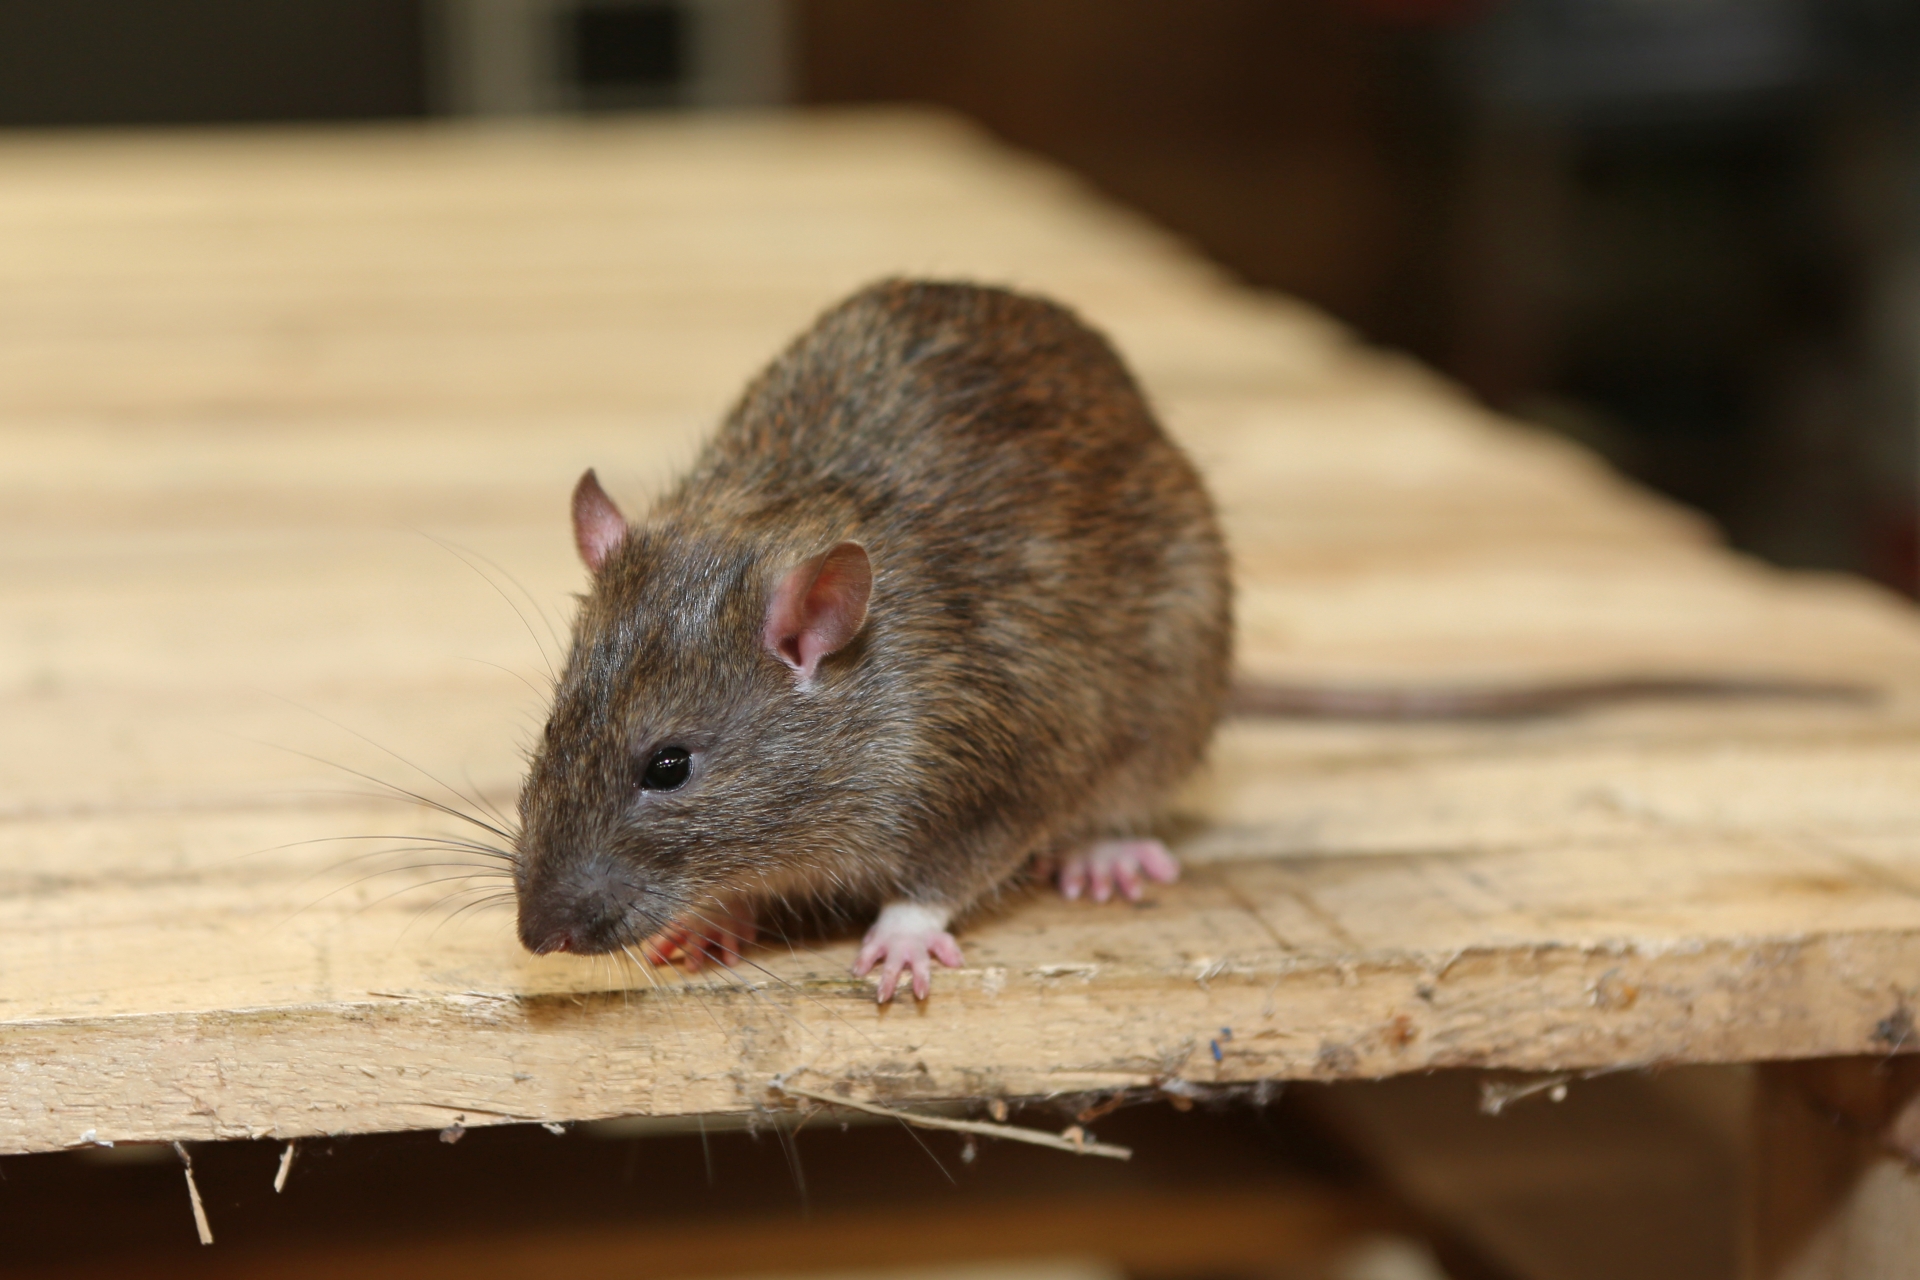 Rat extermination, Pest Control in Clerkenwell, Finsbury, Barbican, EC1. Call Now 020 8166 9746